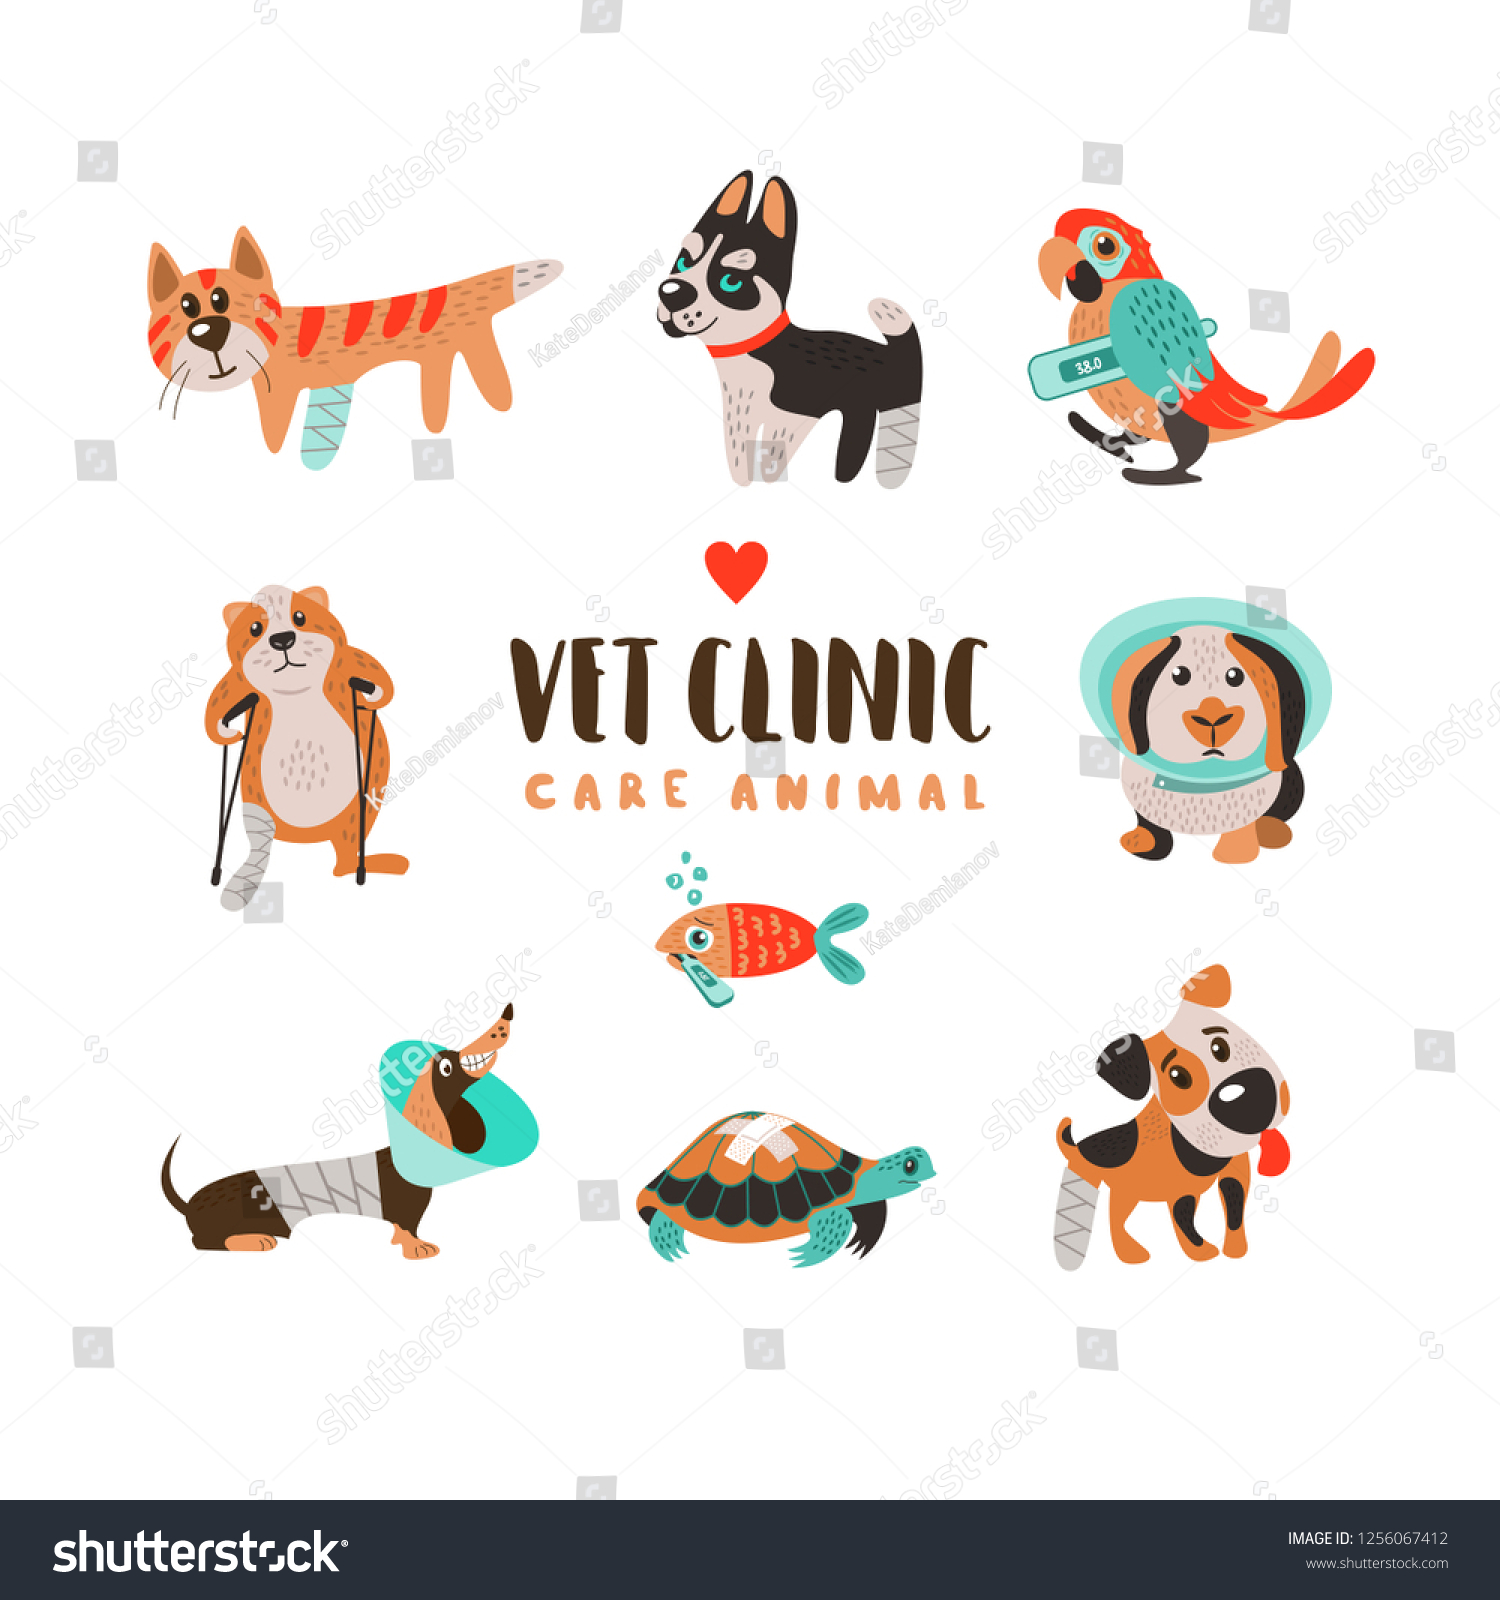 SVG of Collection of cute cartoon animals, sick Pets. Dogs of different breeds, a cat, a hamster with a broken leg, a parrot, a fish and a turtle. On white background. For veterinary clinics of animal shelte svg